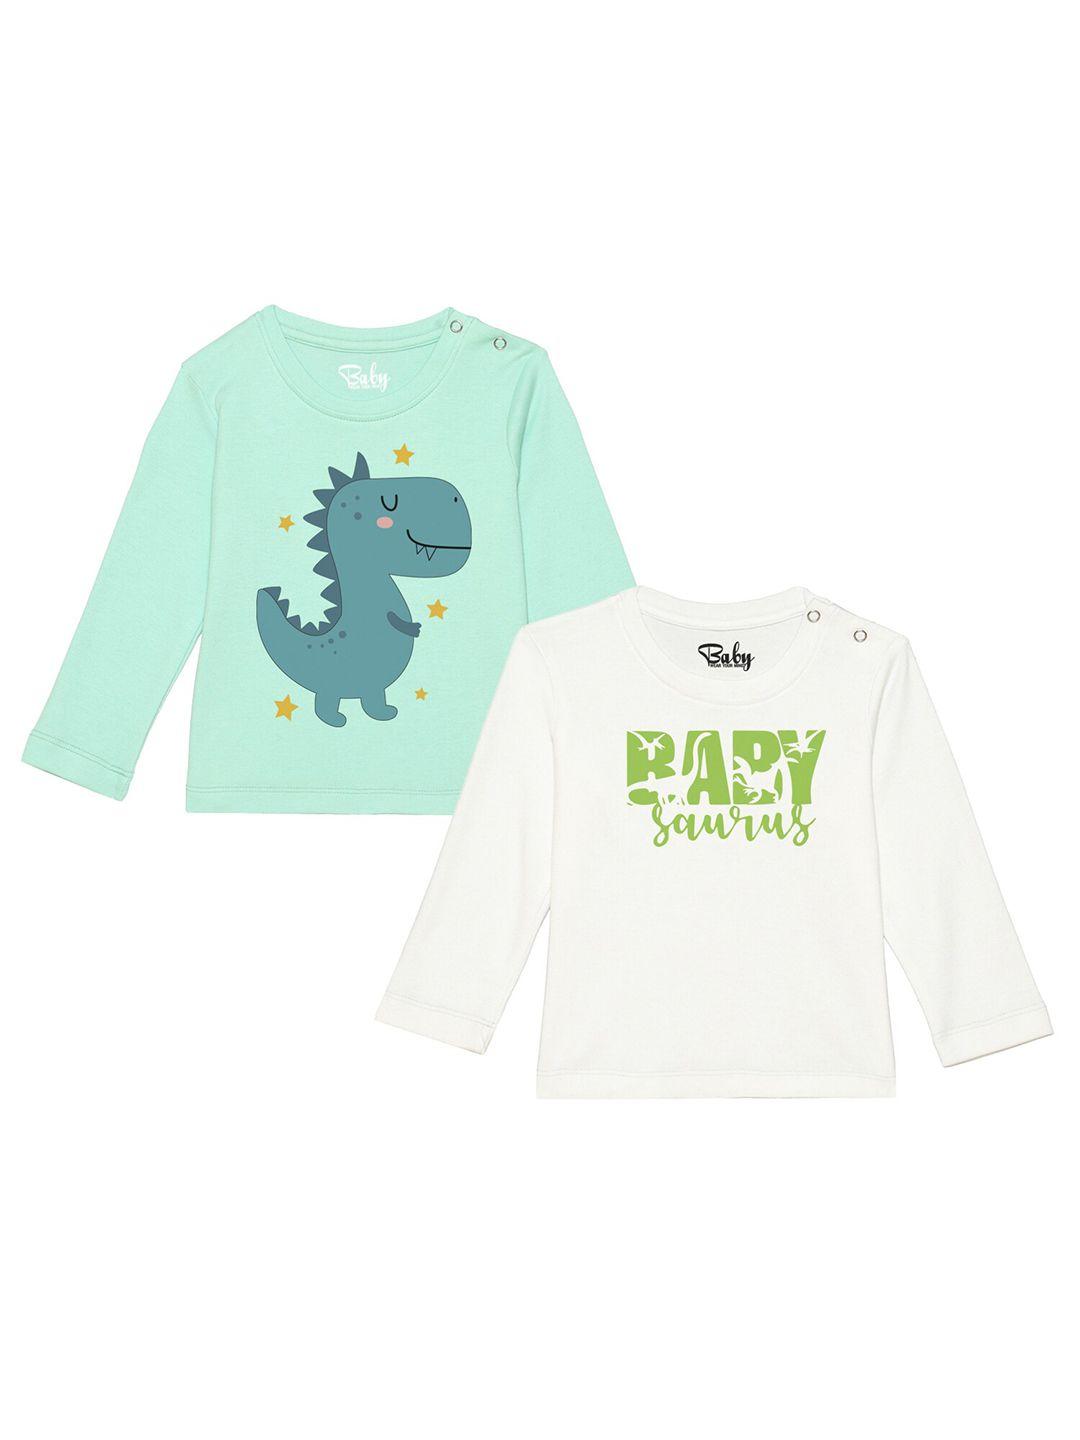 wear-your-mind-boys-set-of-2-green-&-off-white-typography-printed-t-shirt